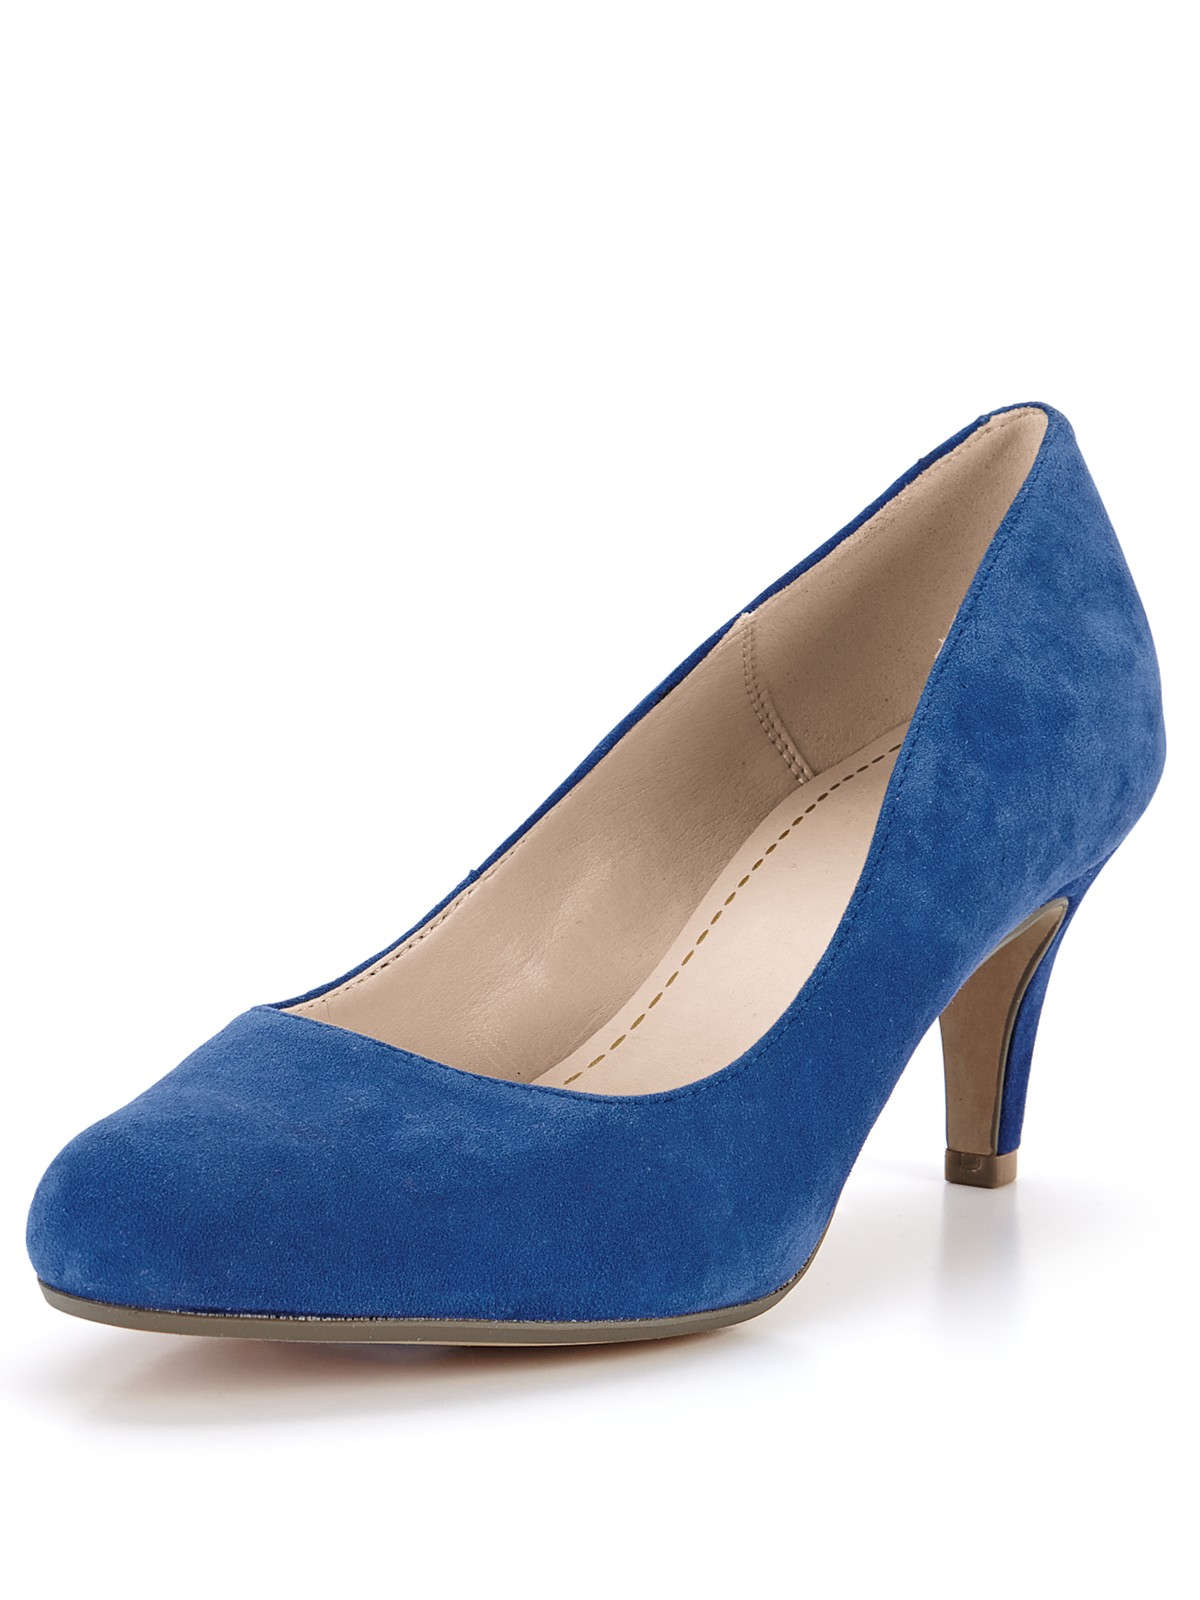 Clarks Arista Abe Suede Court Shoes in Blue (blue suede) Lyst